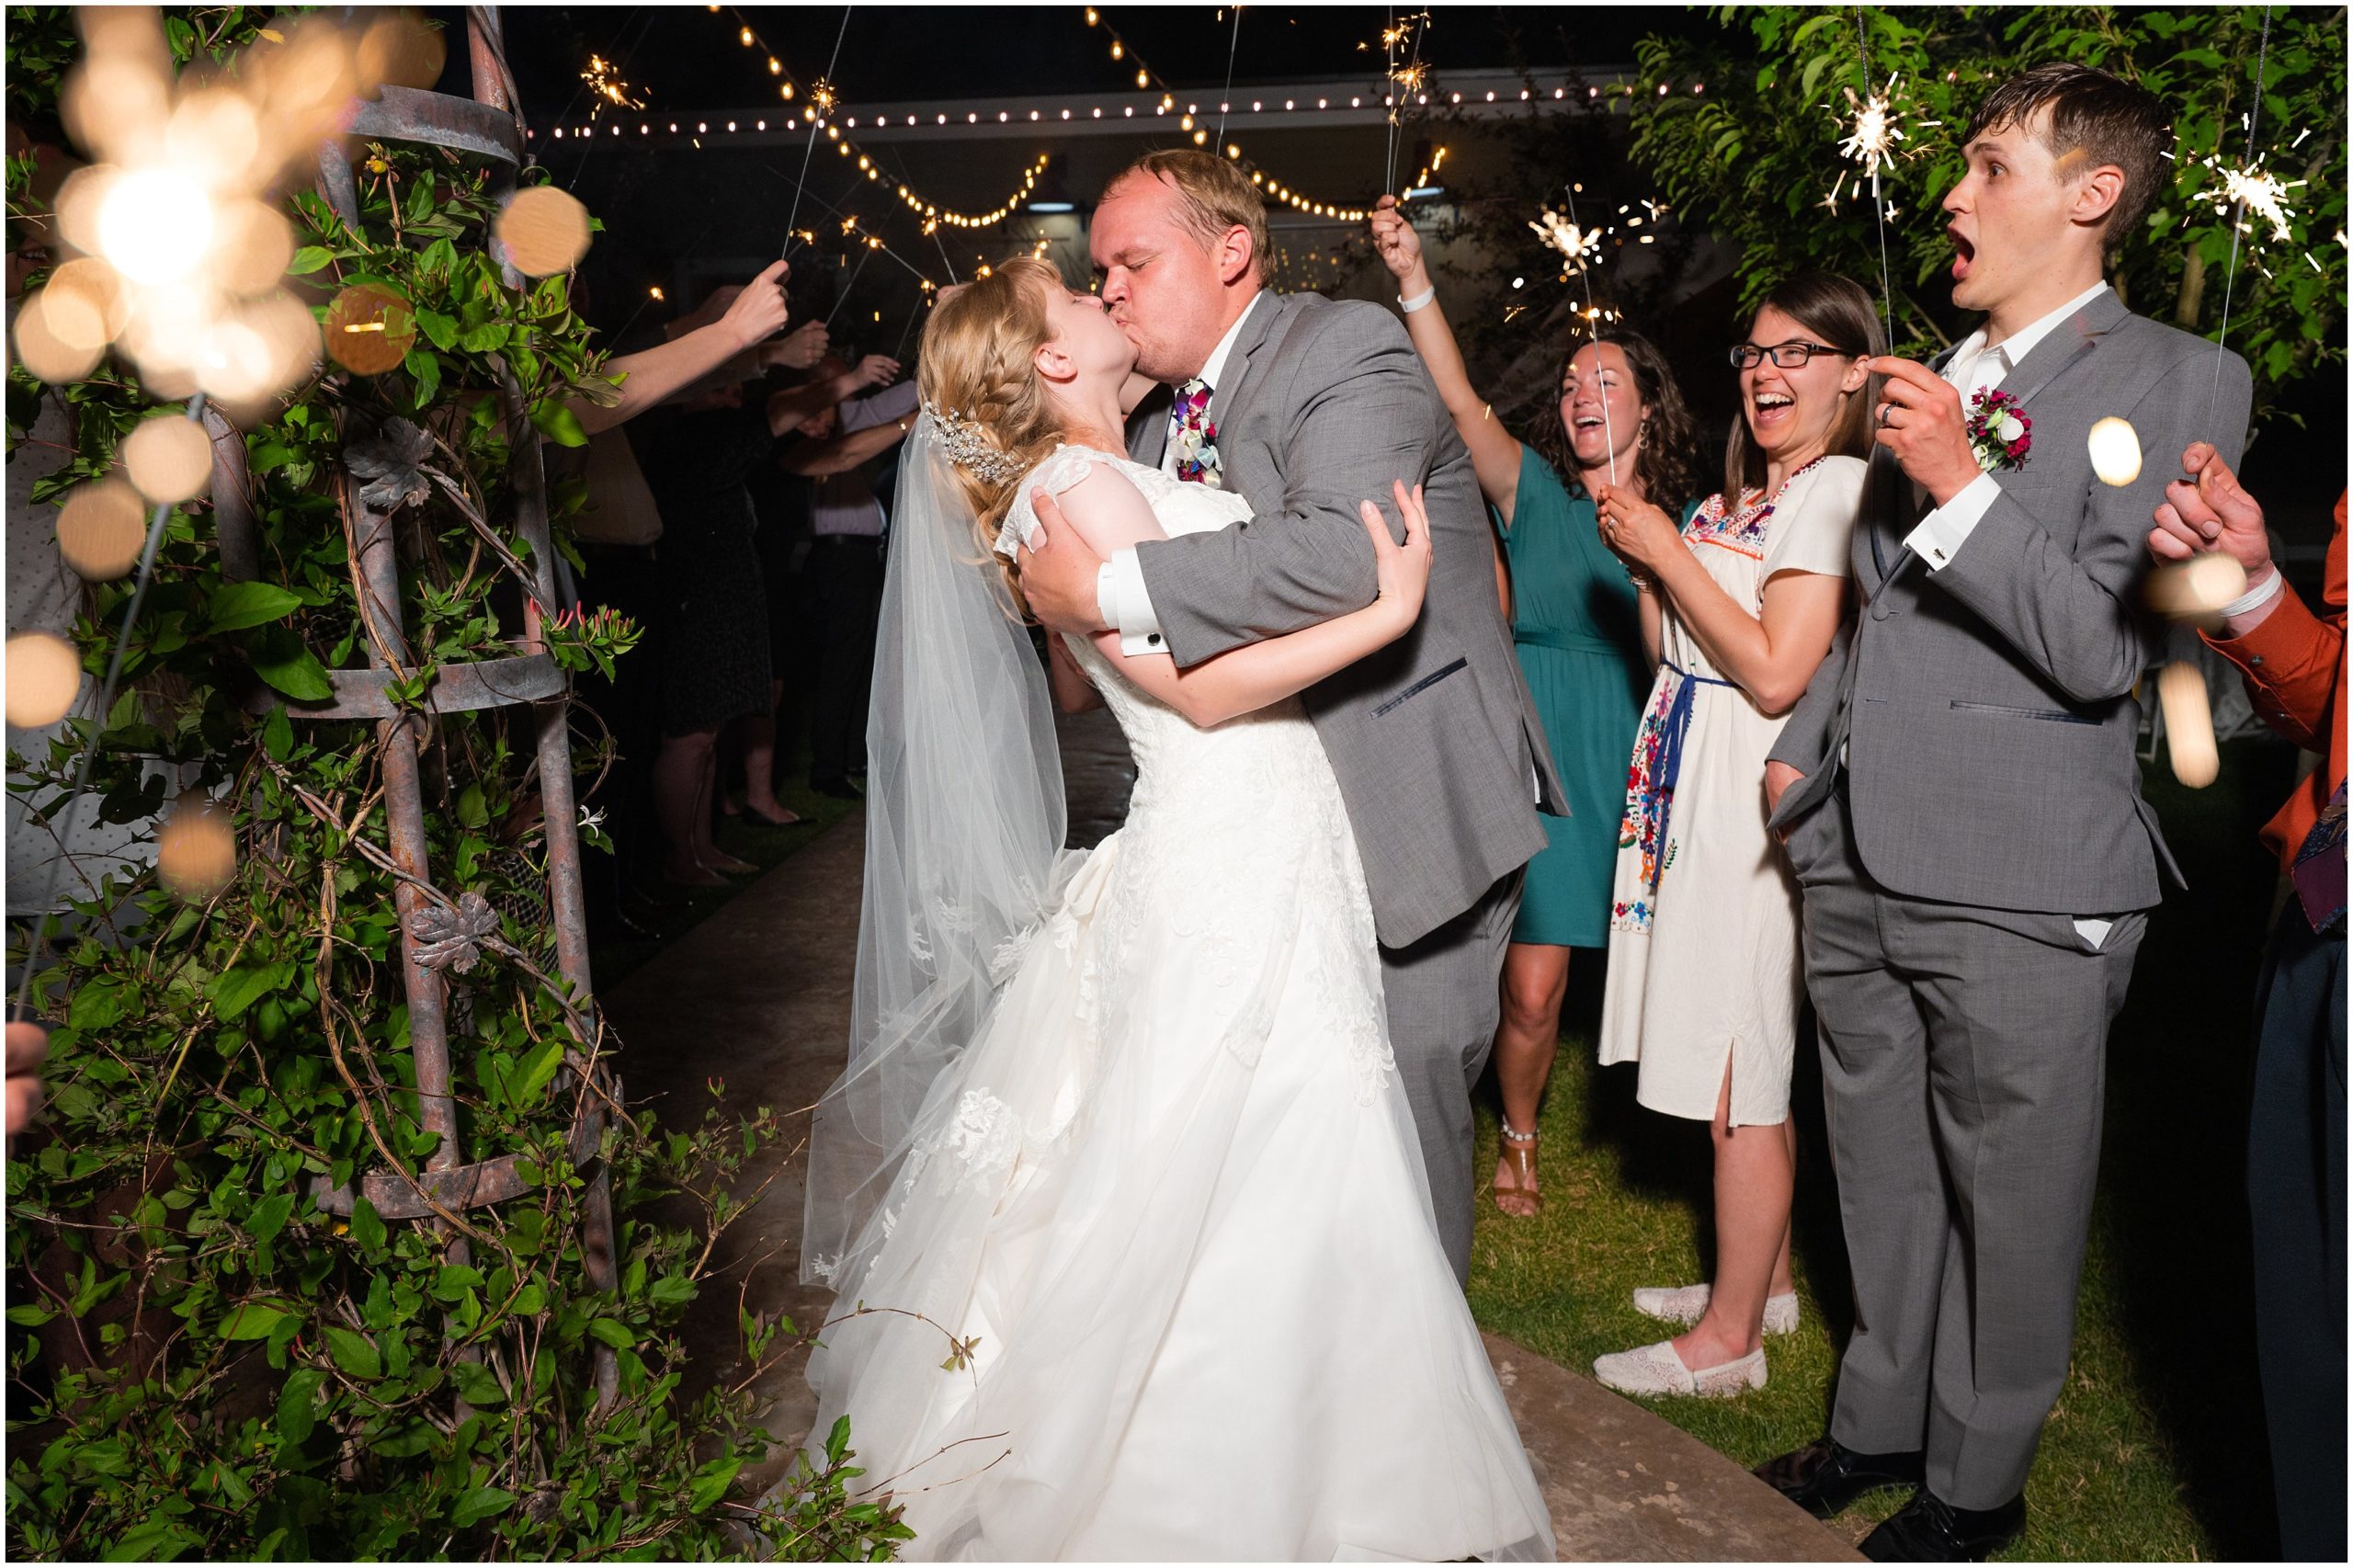 Sparkler exit | Orchid Inspired Summer Wedding at Oak Hills Utah | Jessie and Dallin Photography